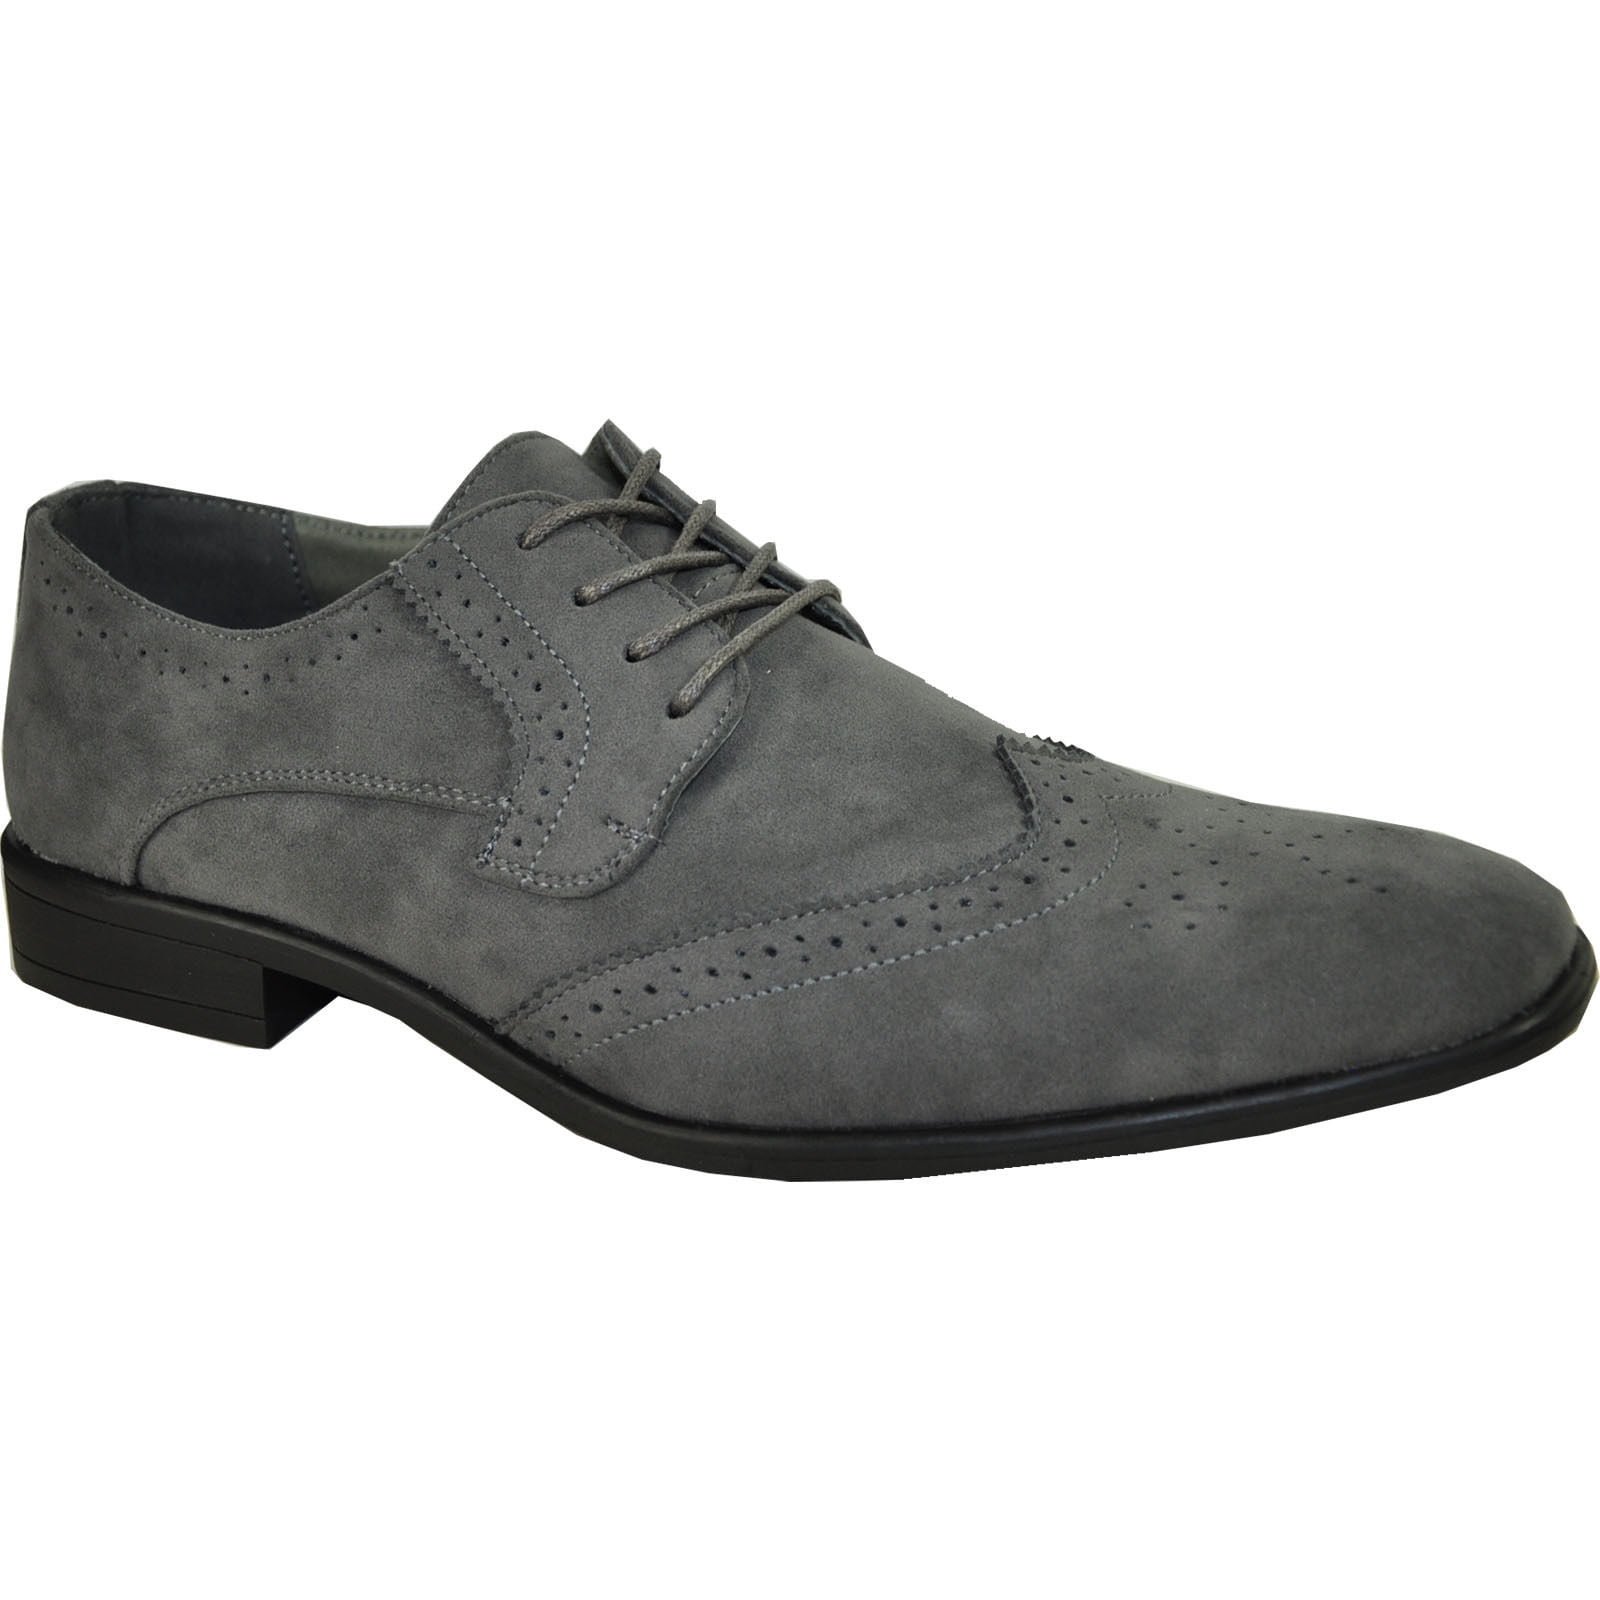 BRAVO/KING-3 Dress Shoe Classic Faux Suede Oxford Leather Lining Gray ...